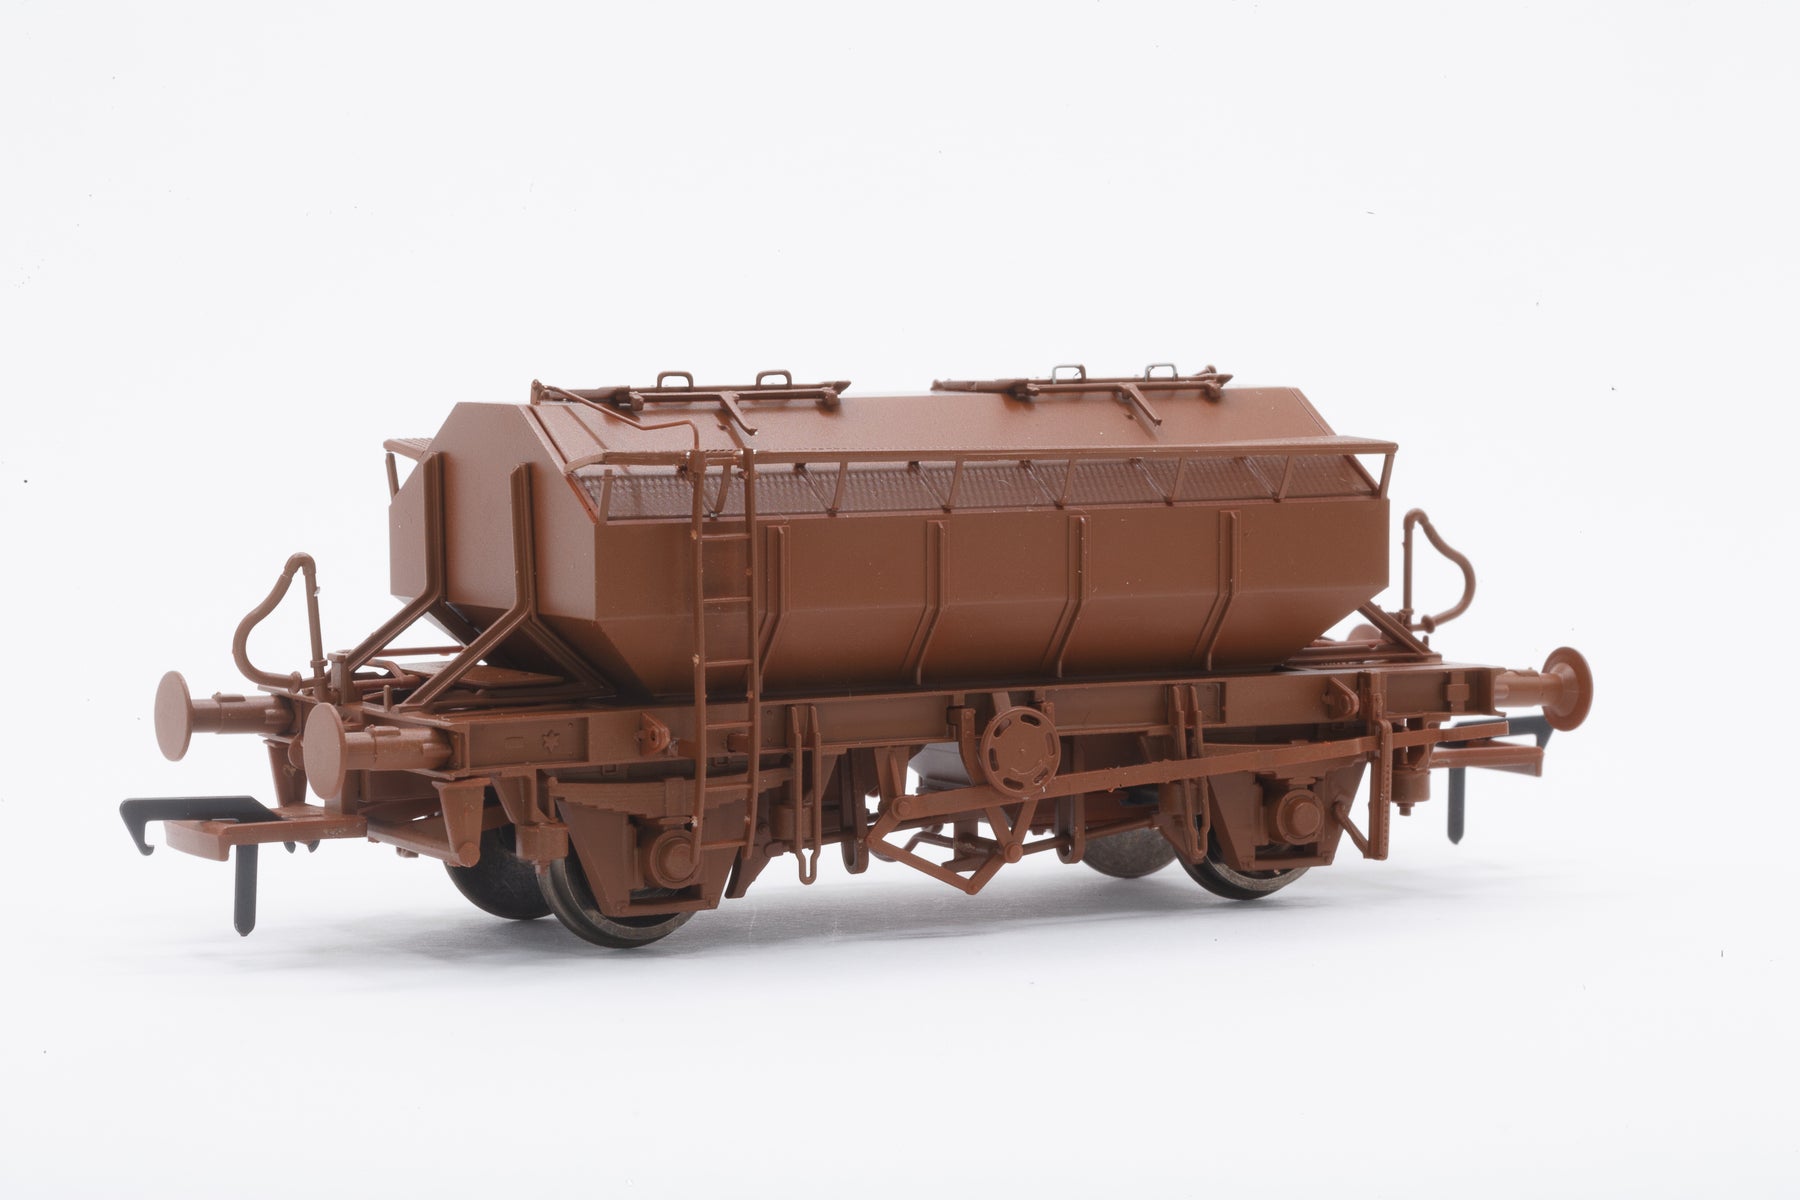 0Mg - Magnesite Wagons Next For IRM